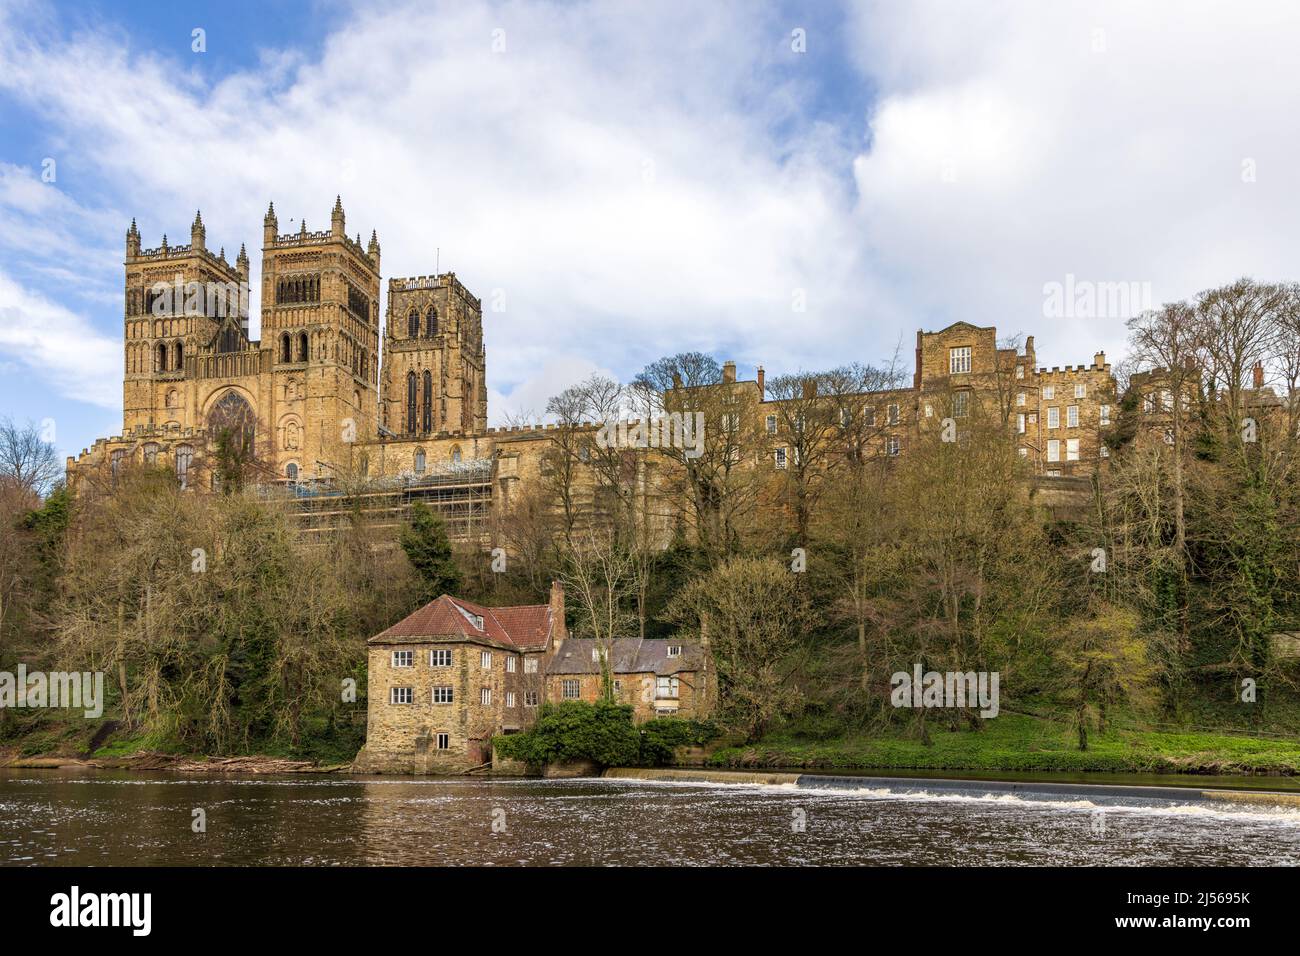 The magnificent Durham Cathedral and the Old Fulling Mill, viewed over the River Wear in the city of Durham. Stock Photo